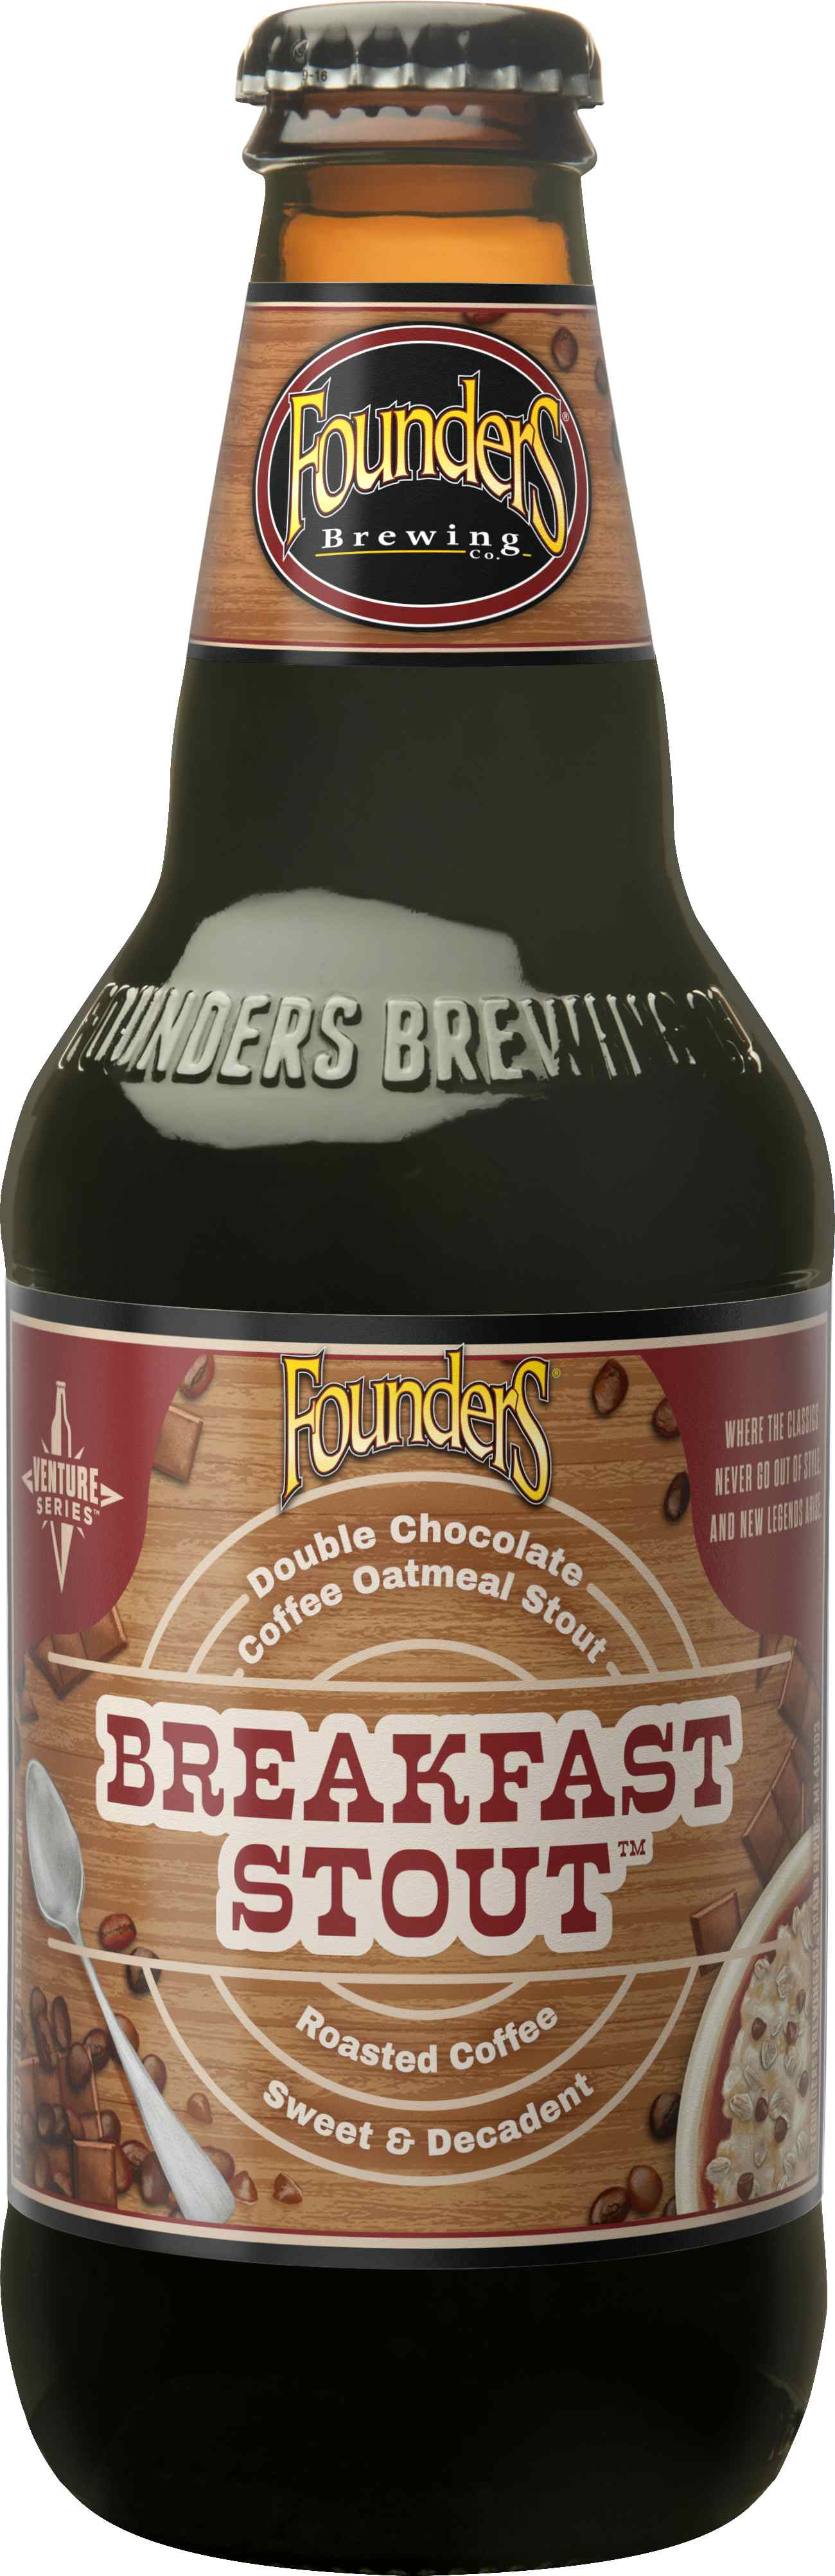 Founders Breakfast Stout, Oatmeal Stout Beer